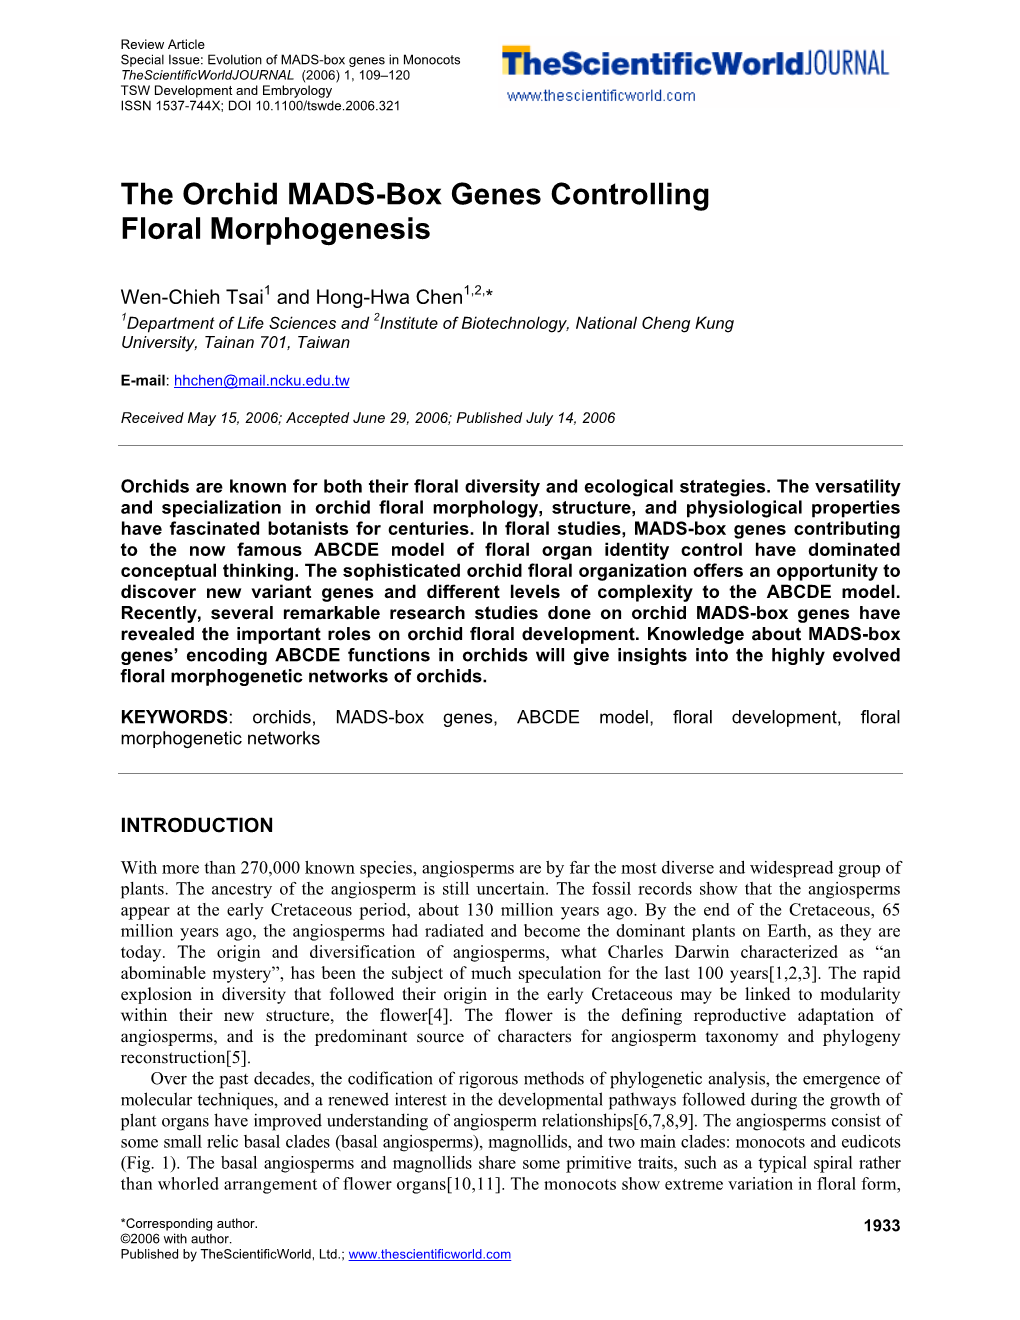 The Orchid MADS-Box Genes Controlling Floral Morphogenesis